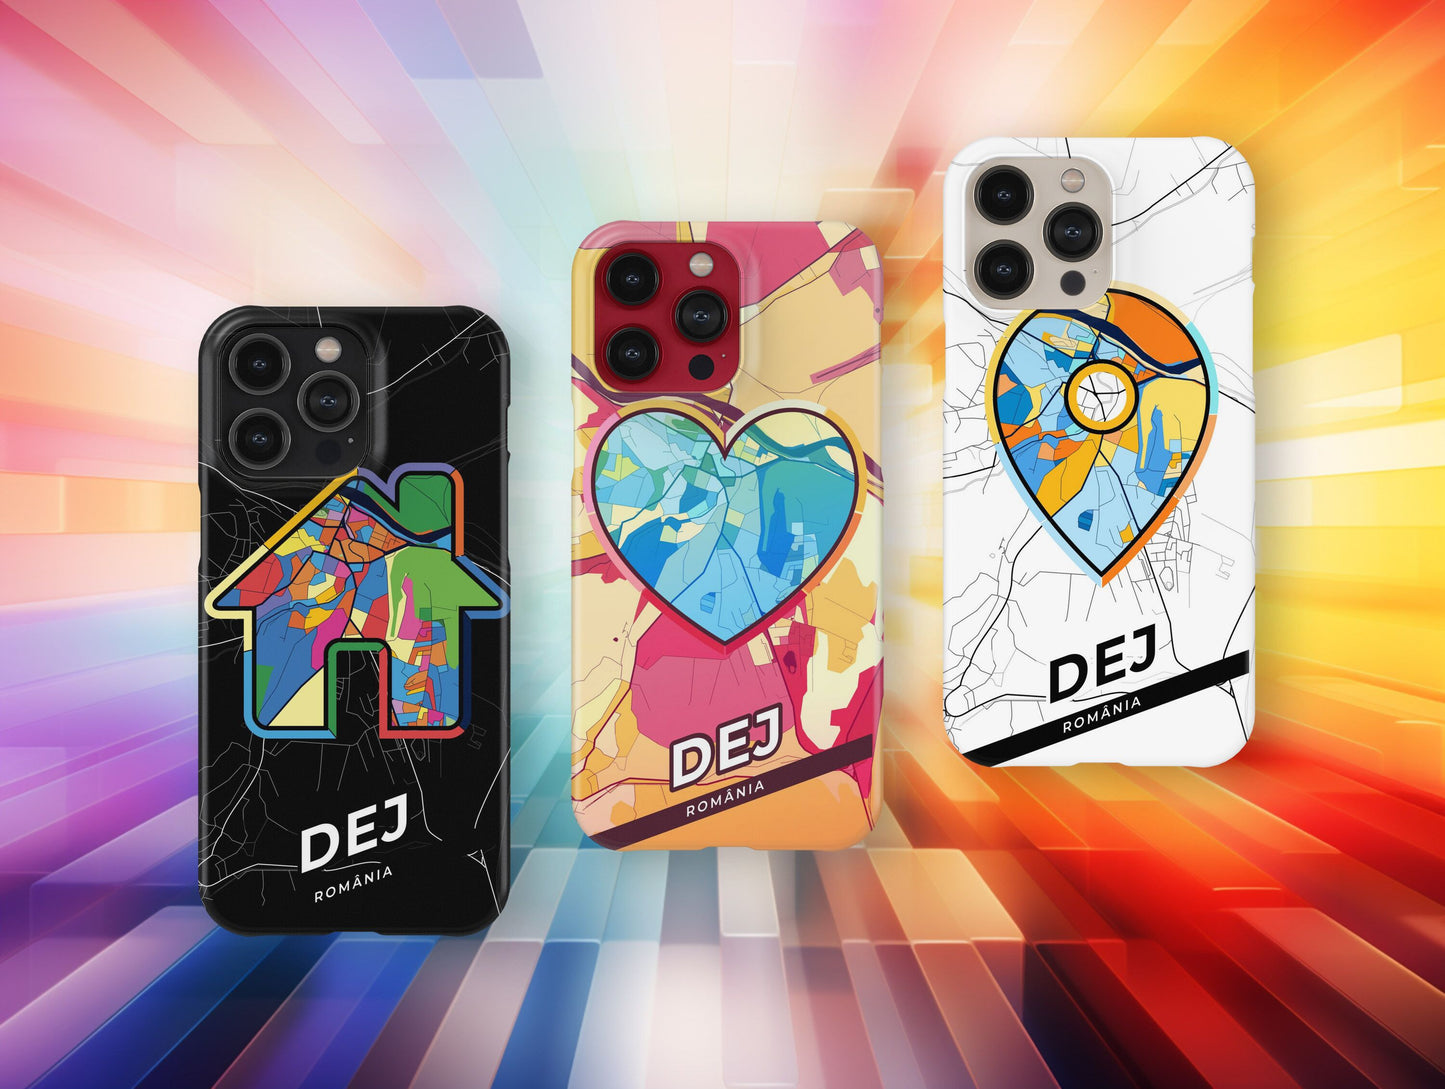 Dej Romania slim phone case with colorful icon. Birthday, wedding or housewarming gift. Couple match cases.